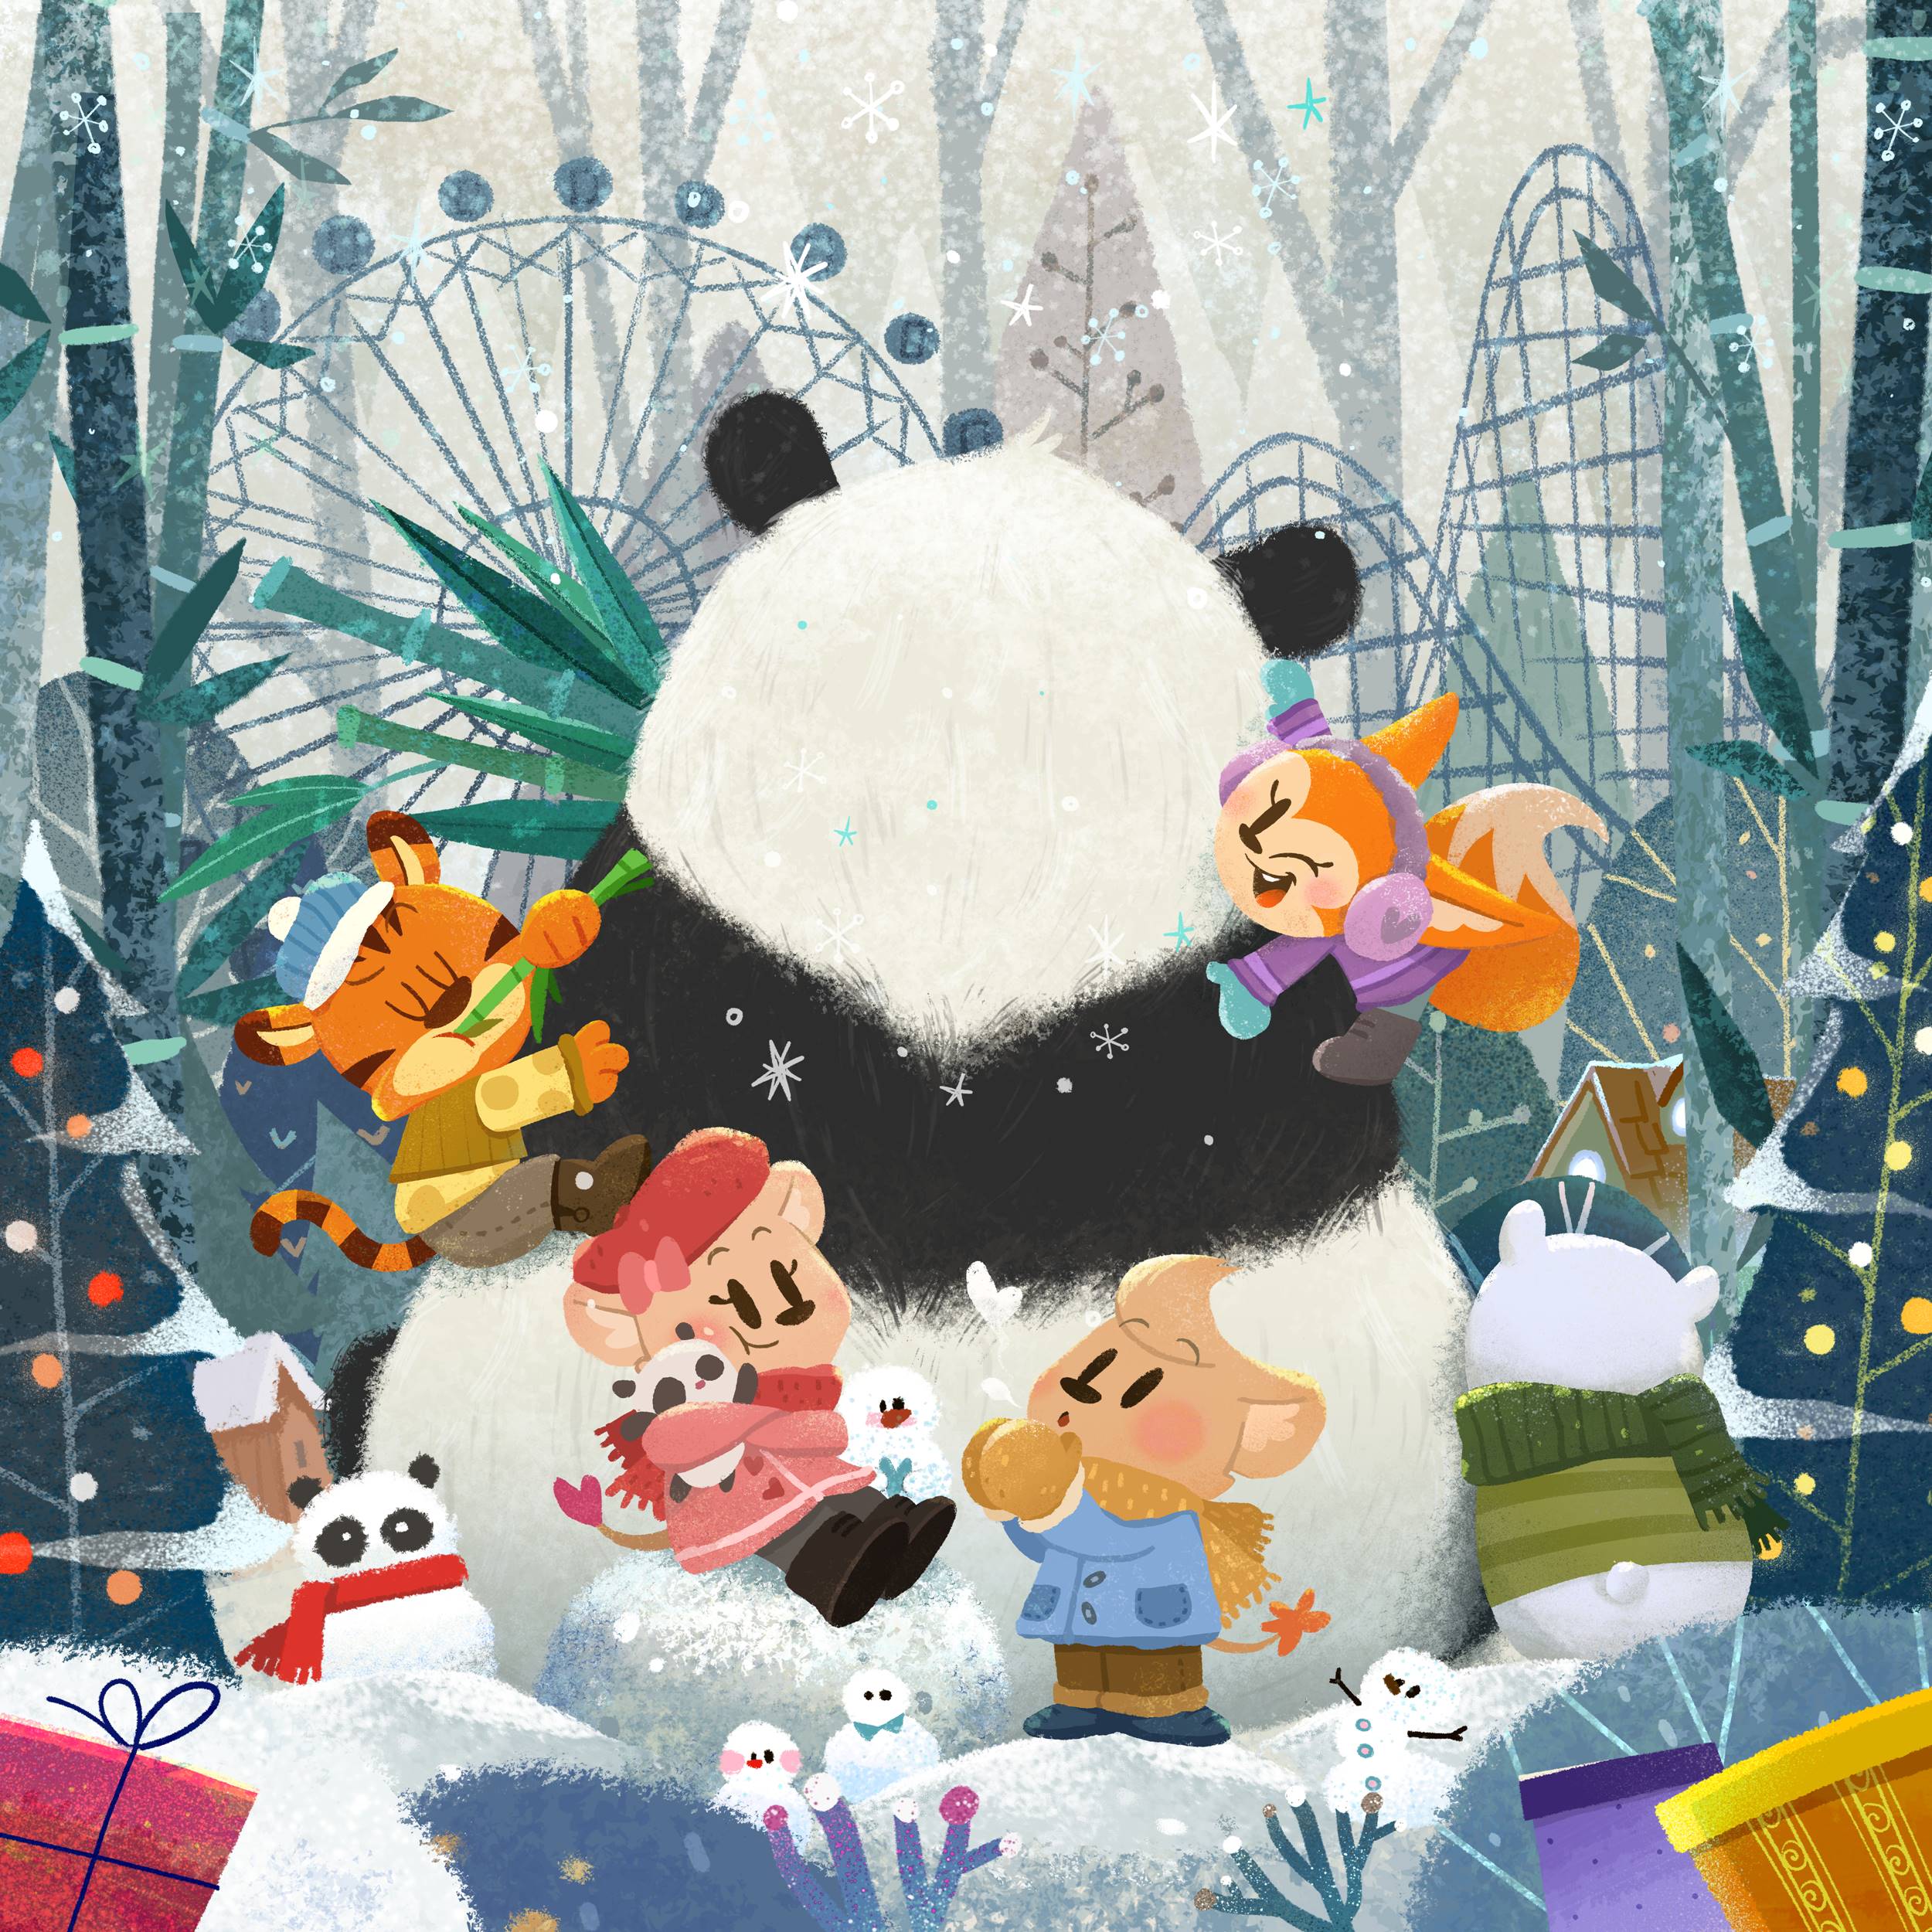 With parades and live shows, families can enjoy Christmas with the Bao Family in Wintertopia.